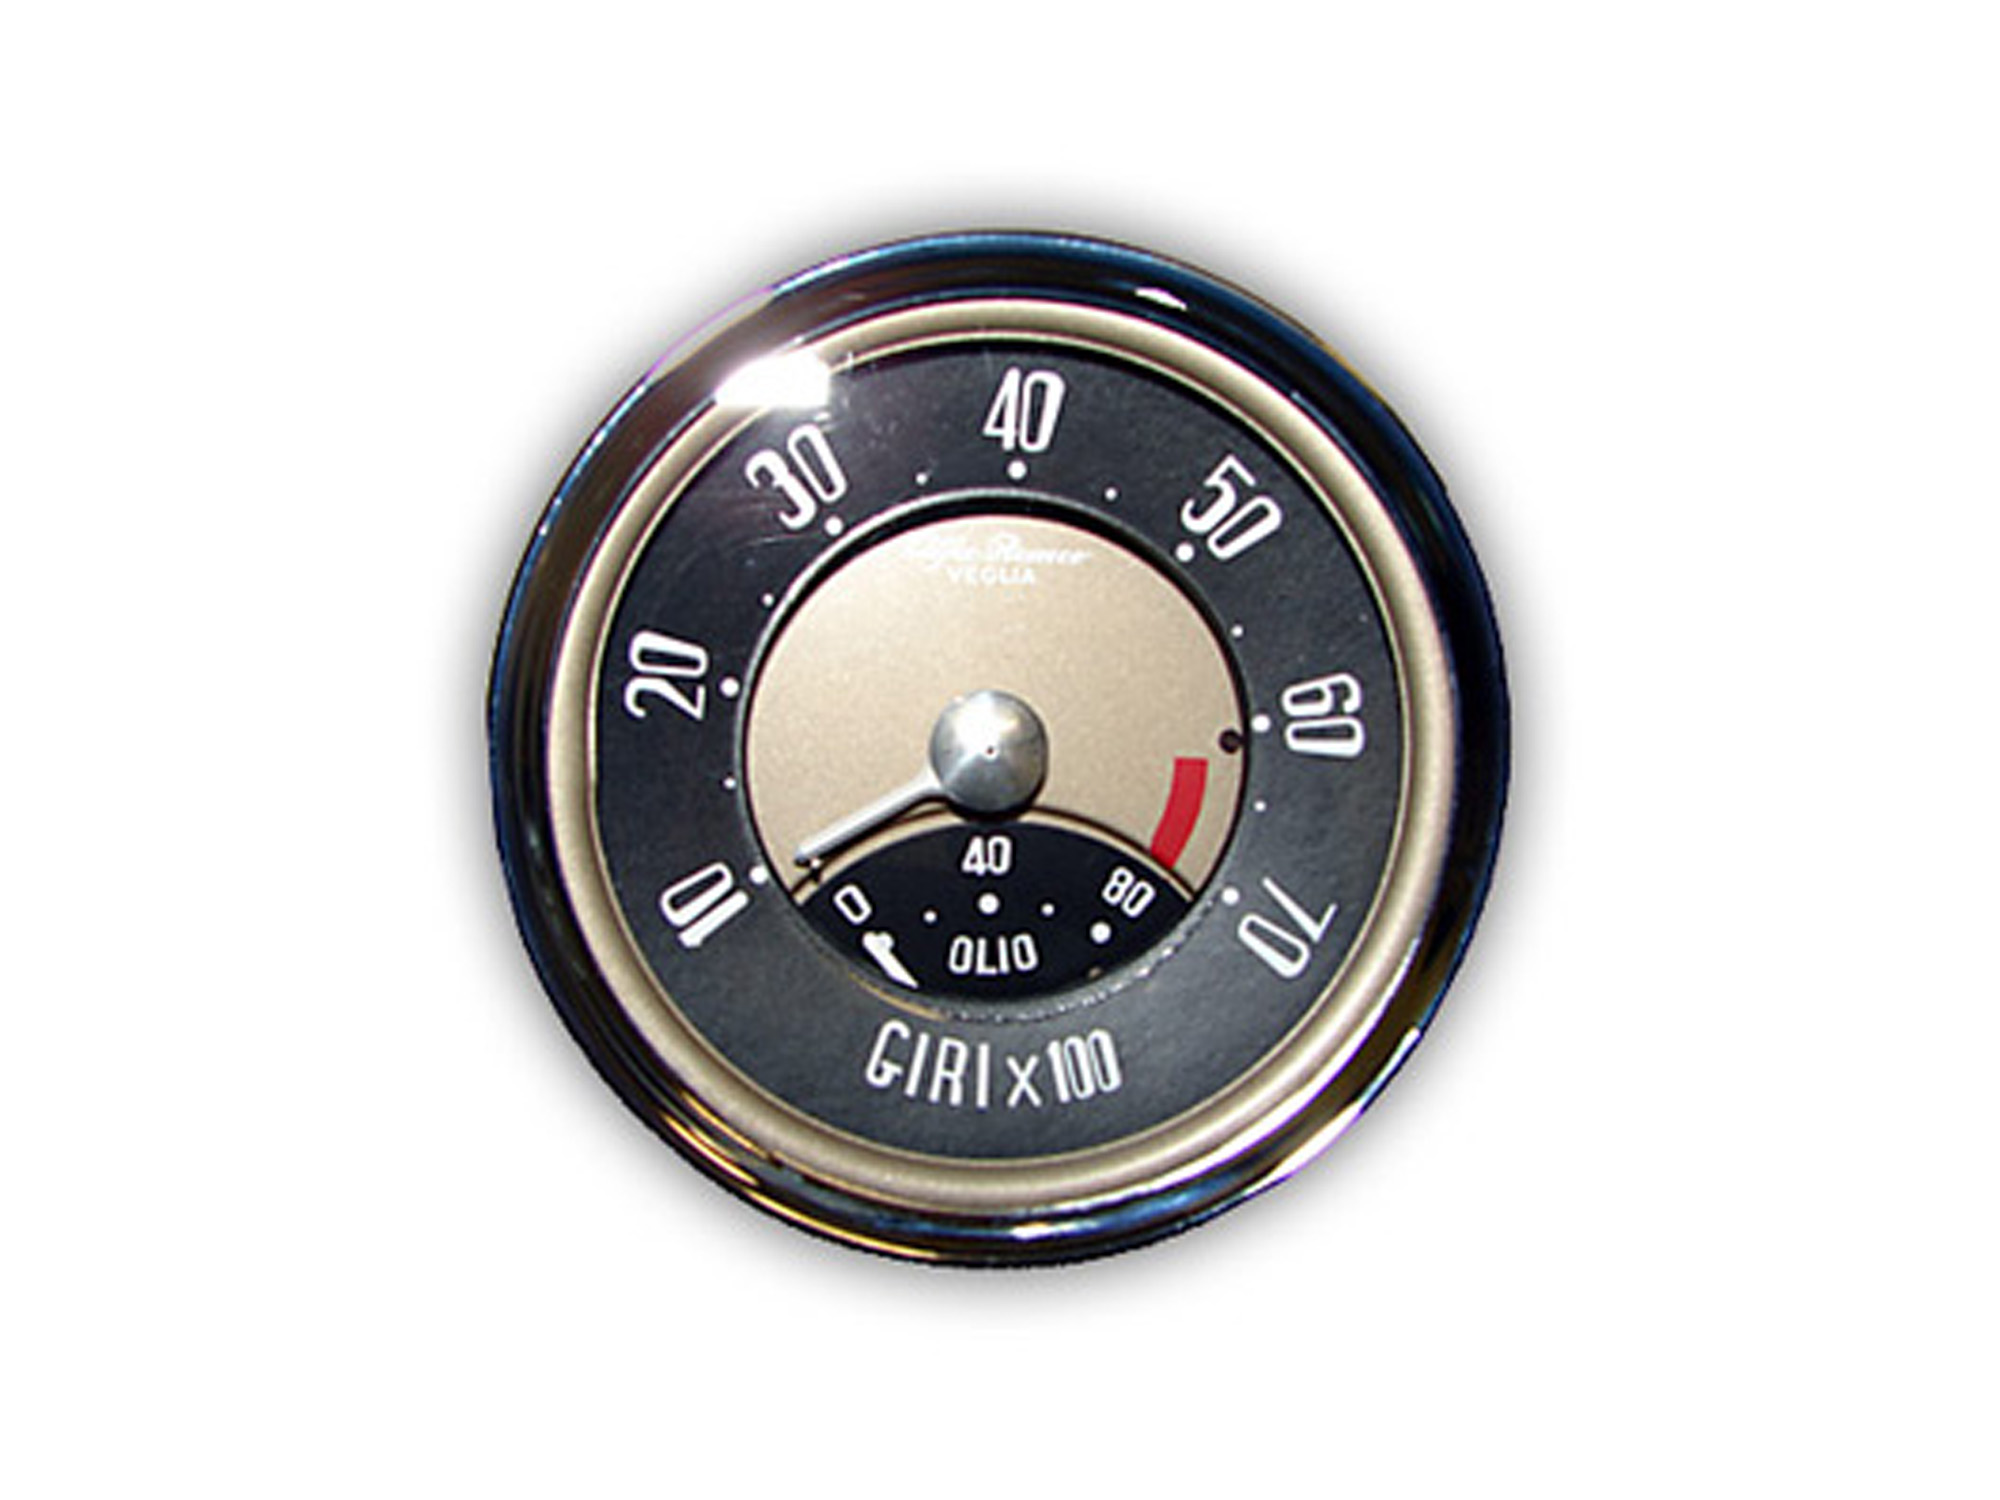 Speedometer for an old vehicle